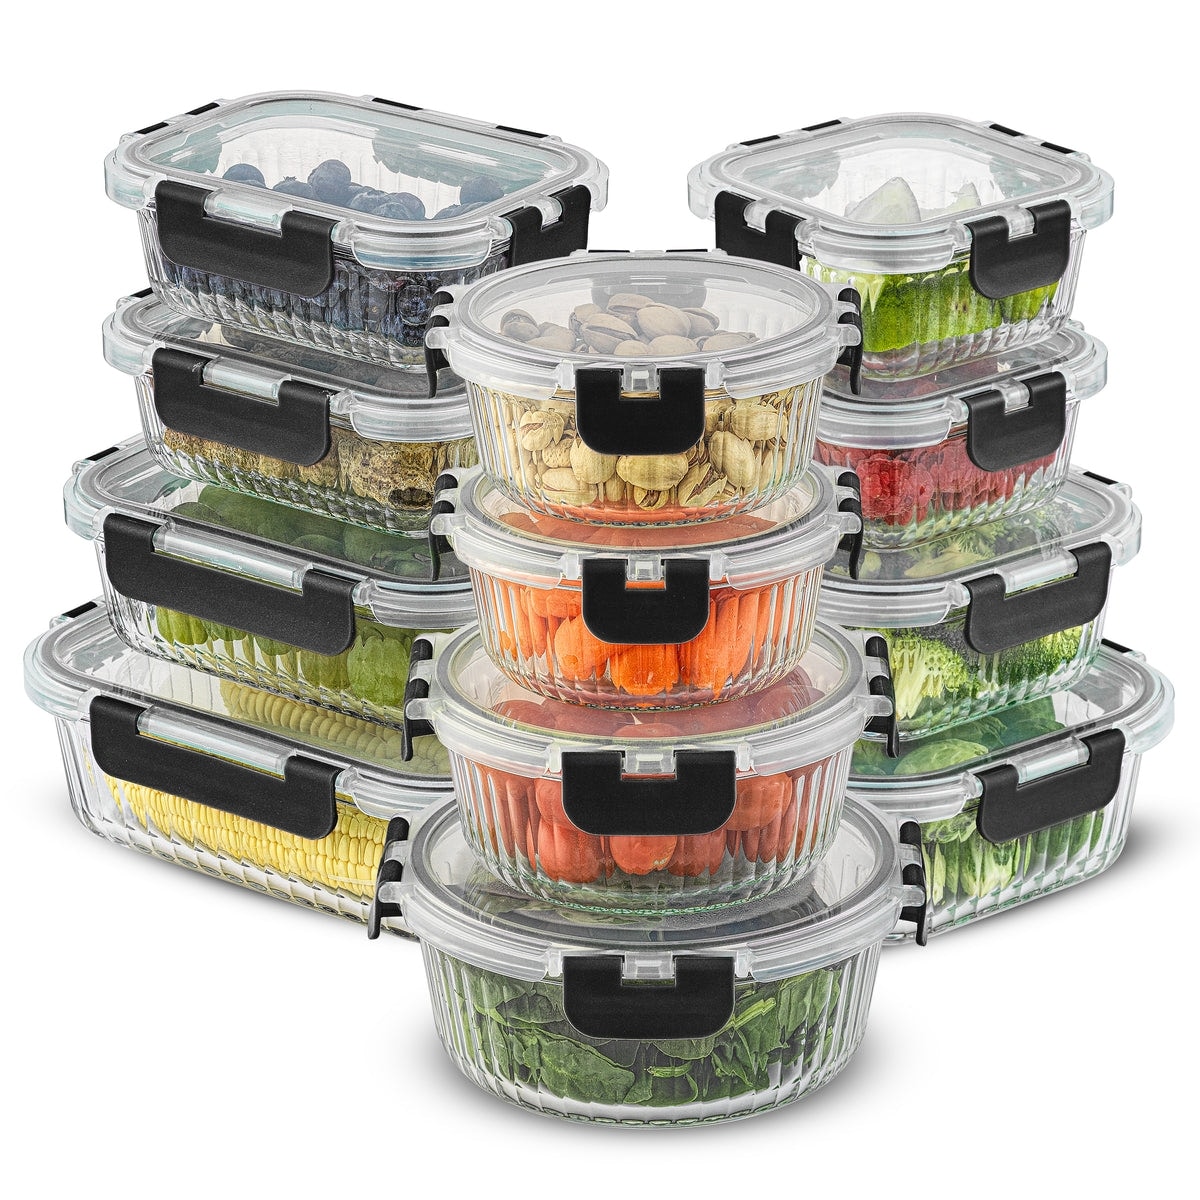  Chef's Path 32 Piece Food Storage Containers Set with Easy Snap  Lids (16 Lids + 16 Containers) - Airtight Plastic Containers for Pantry &  Kitchen Organization - BPA-Free with Free Labels